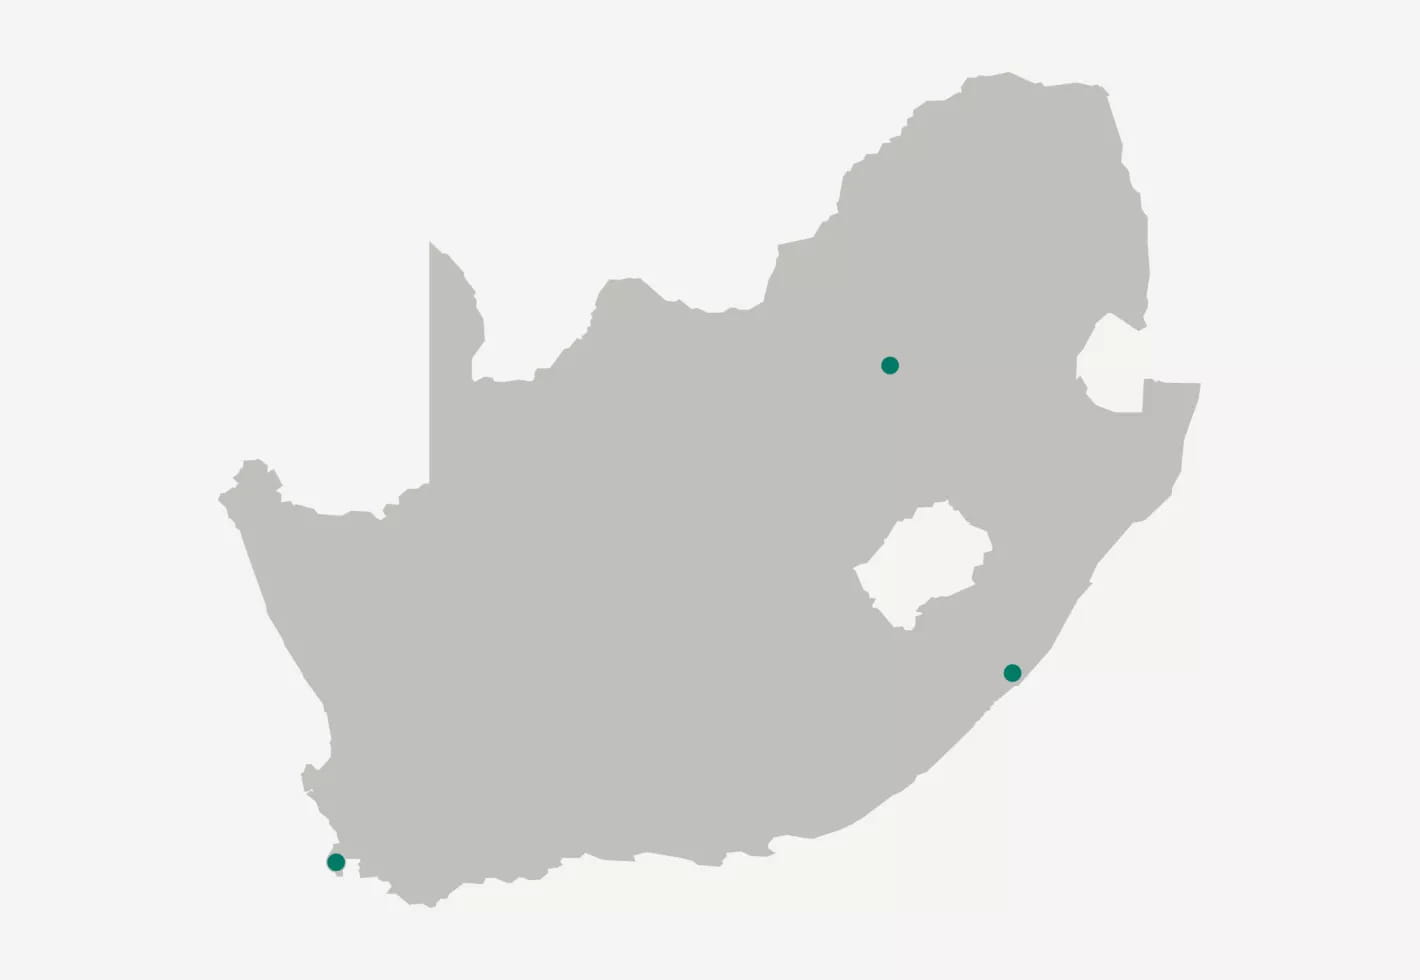 Our presence in South Africa